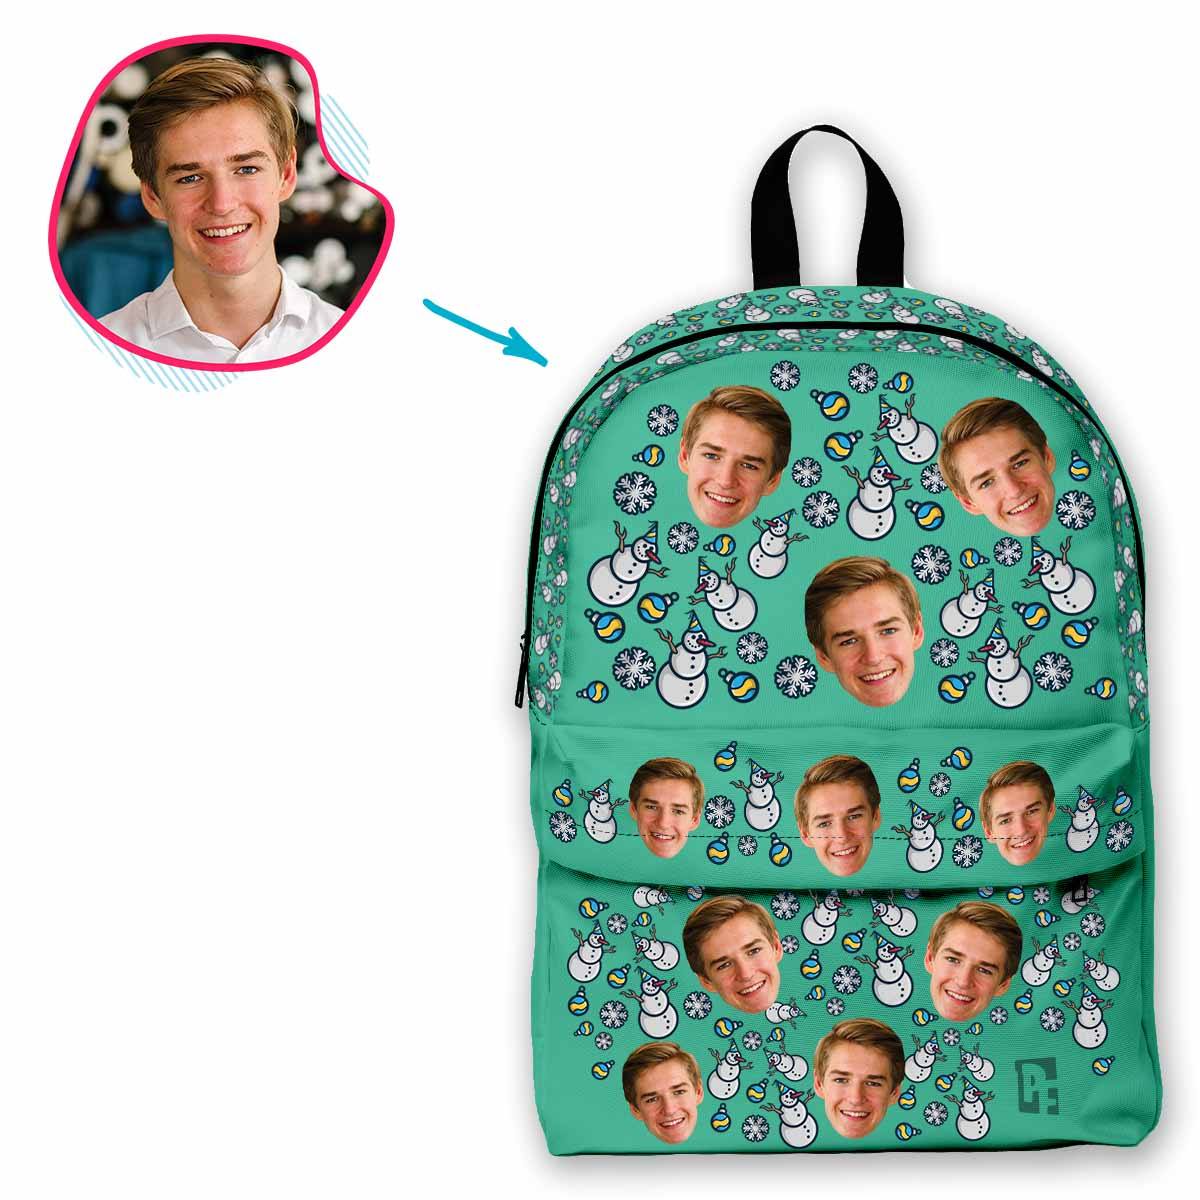 mint Snowman classic backpack personalized with photo of face printed on it